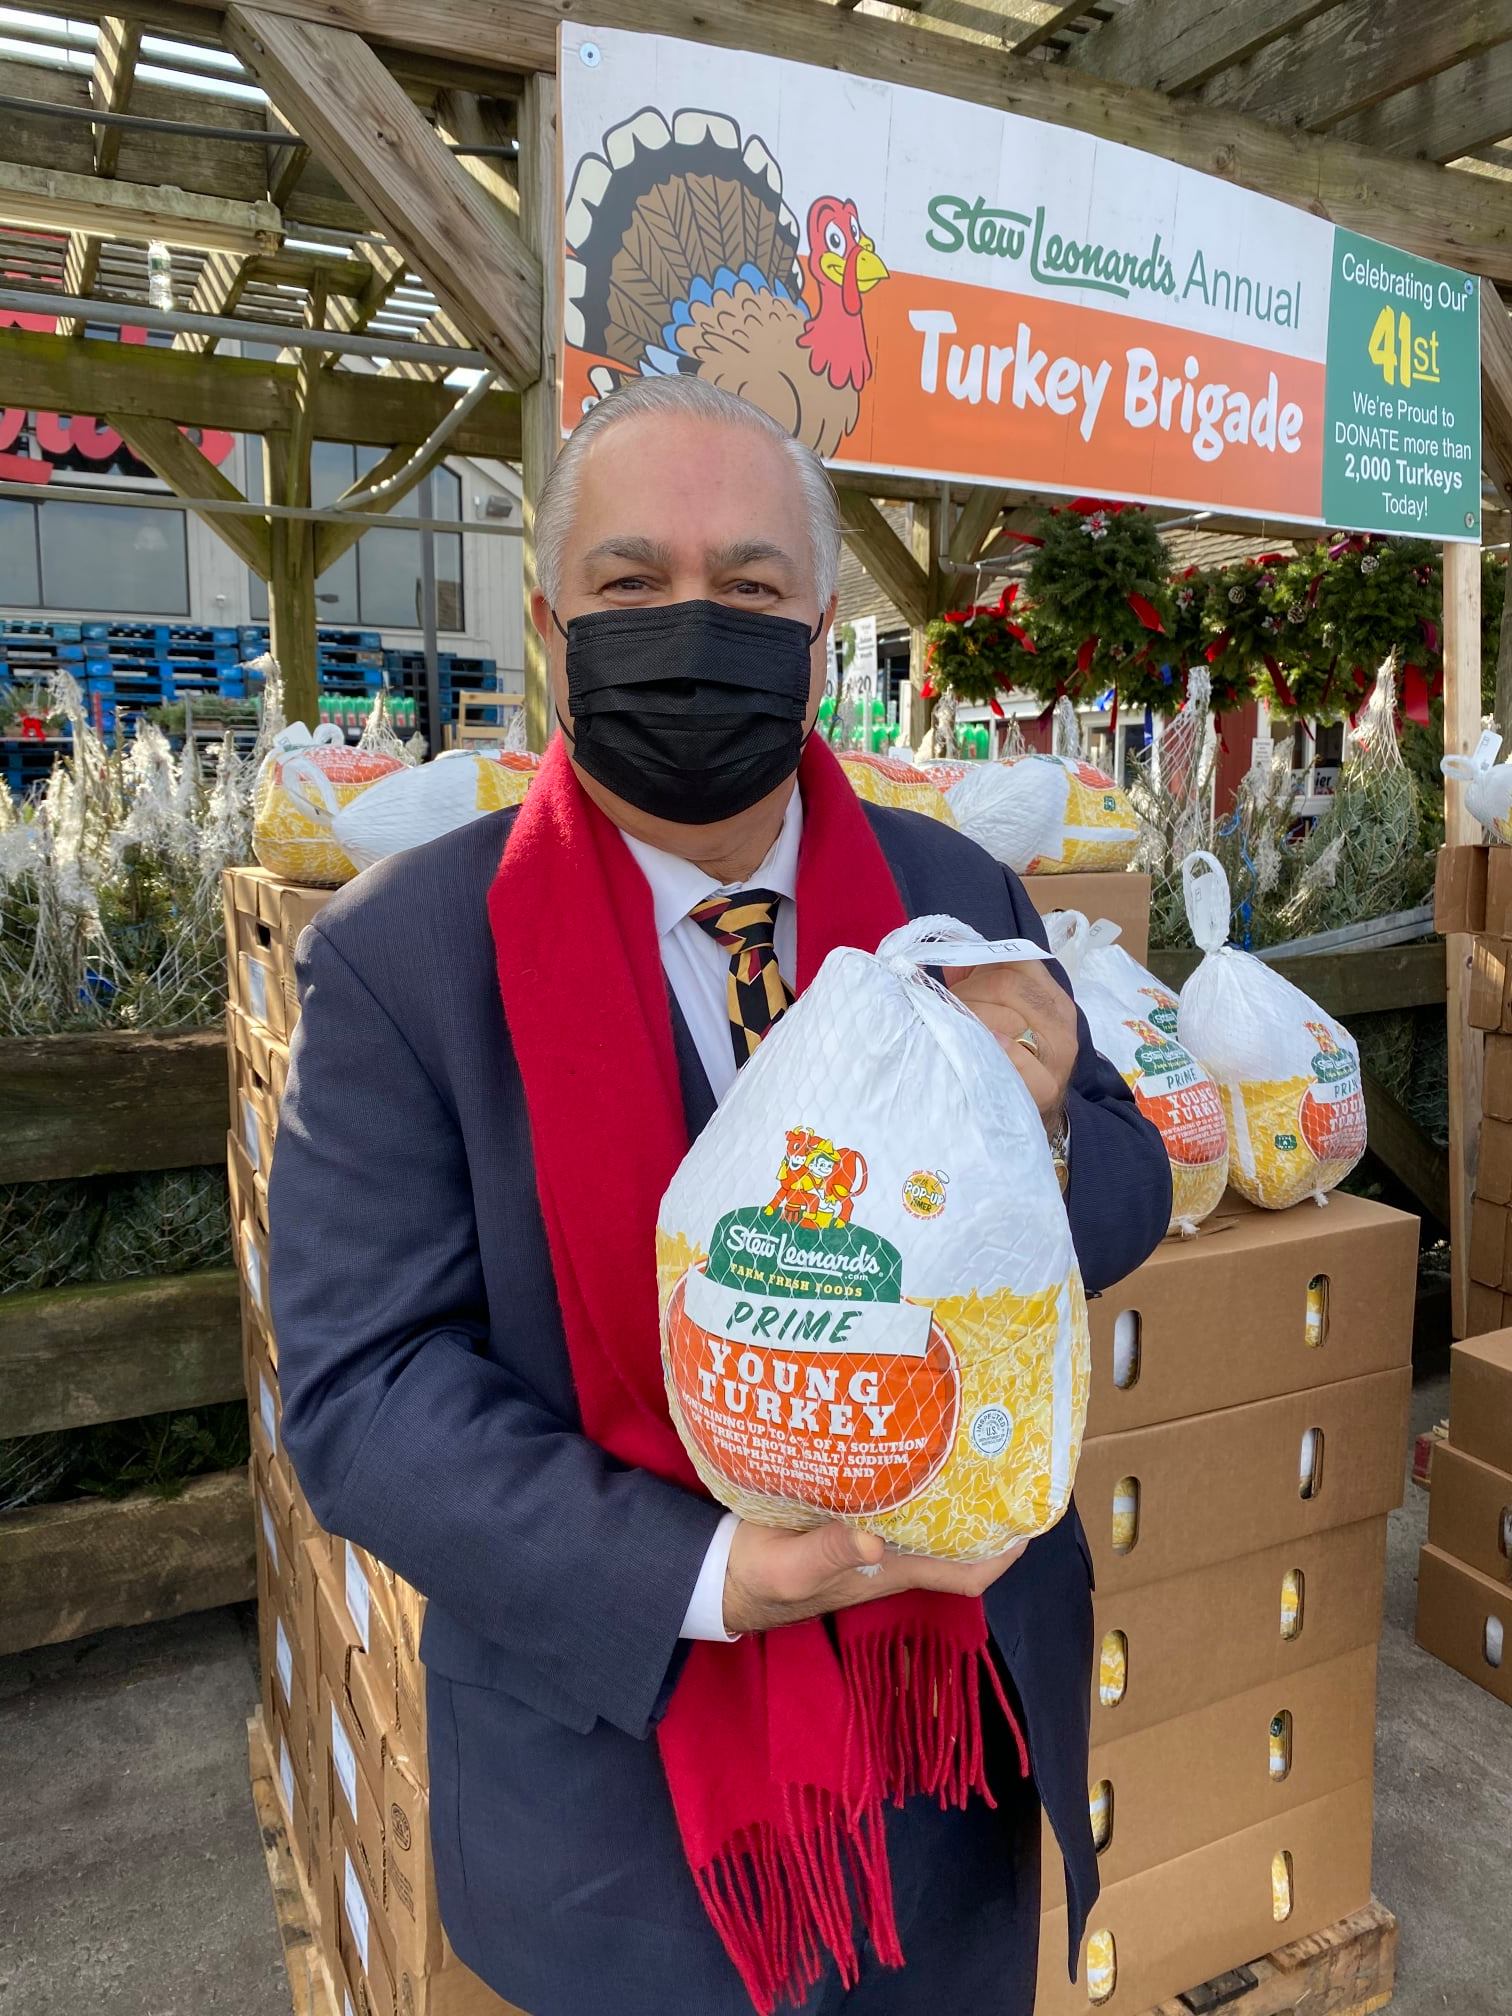 Assemblyman Sayegh helps with the annual Stew Leonard’s Turkey Brigade, donating hundreds of turkeys to charitable organizations in  Yonkers.